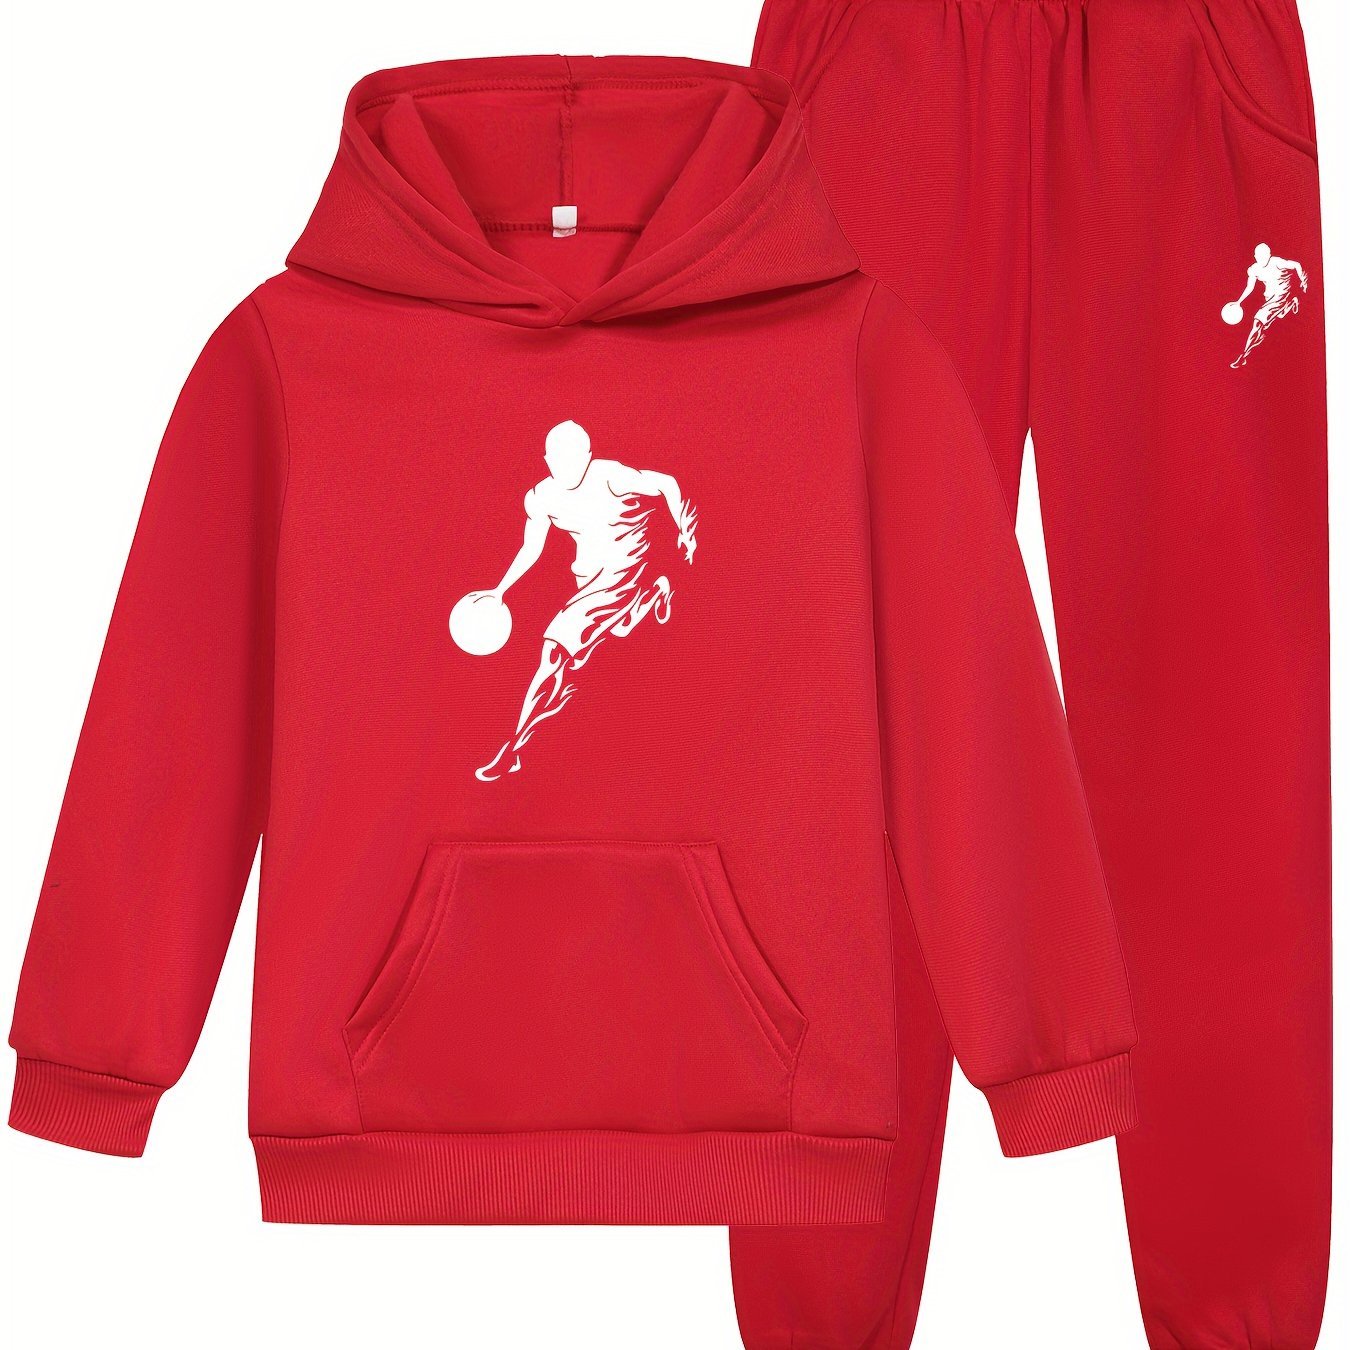 2pcs Vibrant Basketball - Themed Boys Hooded Sweatshirt & Joggers Set - Cozy Athletic Wear for Daily Use and Playdates - Ammpoure Wellbeing